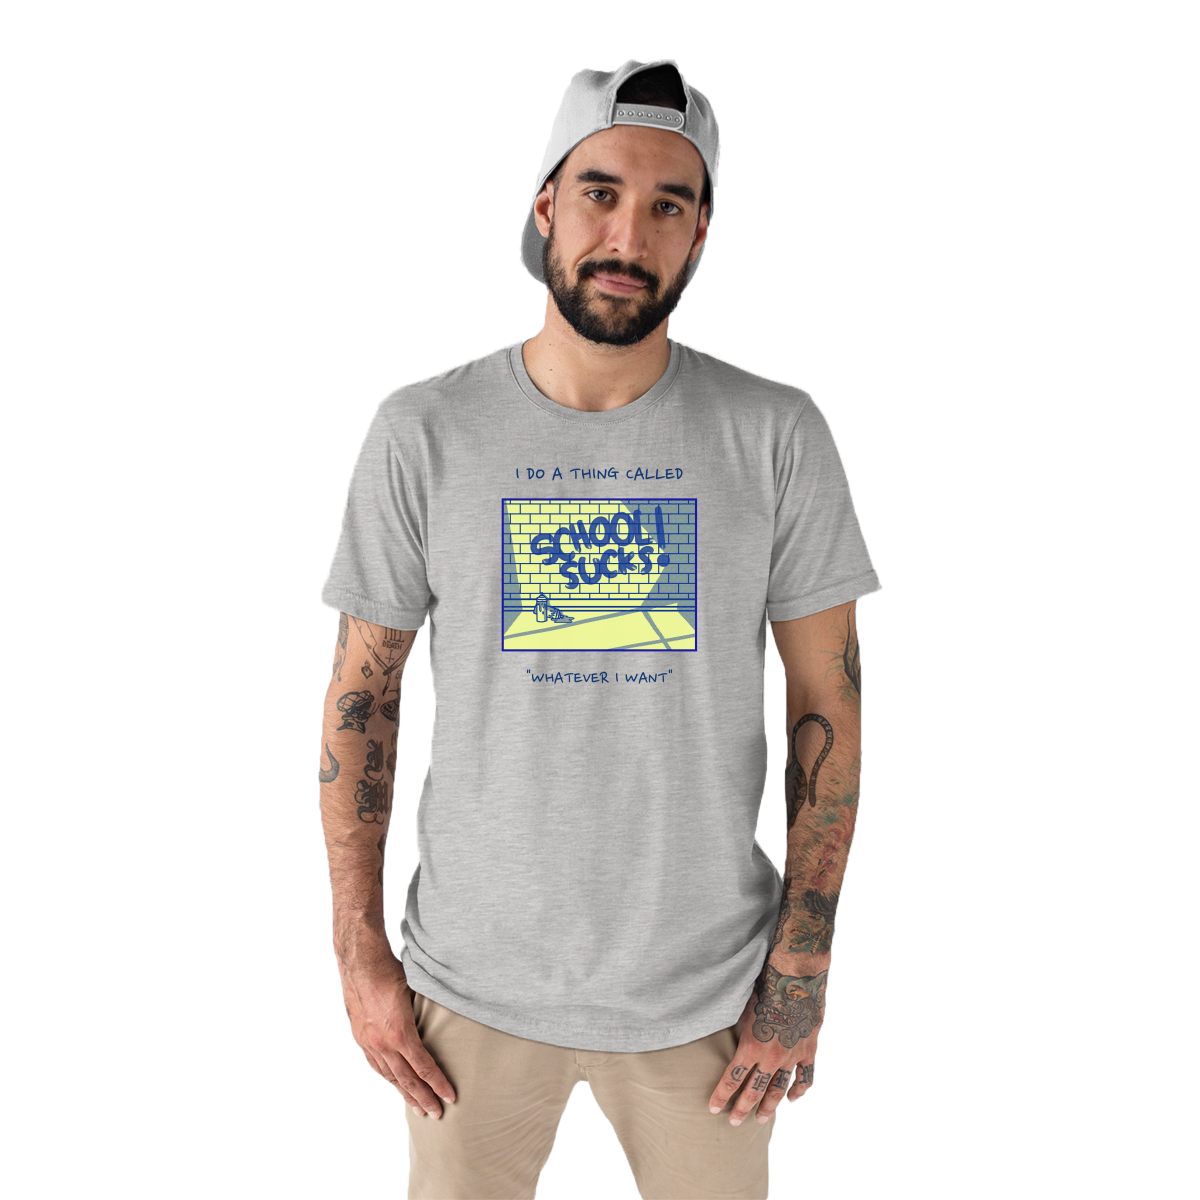 I Do A Thing Called "Whatever I Want" Men's T-shirt | Gray